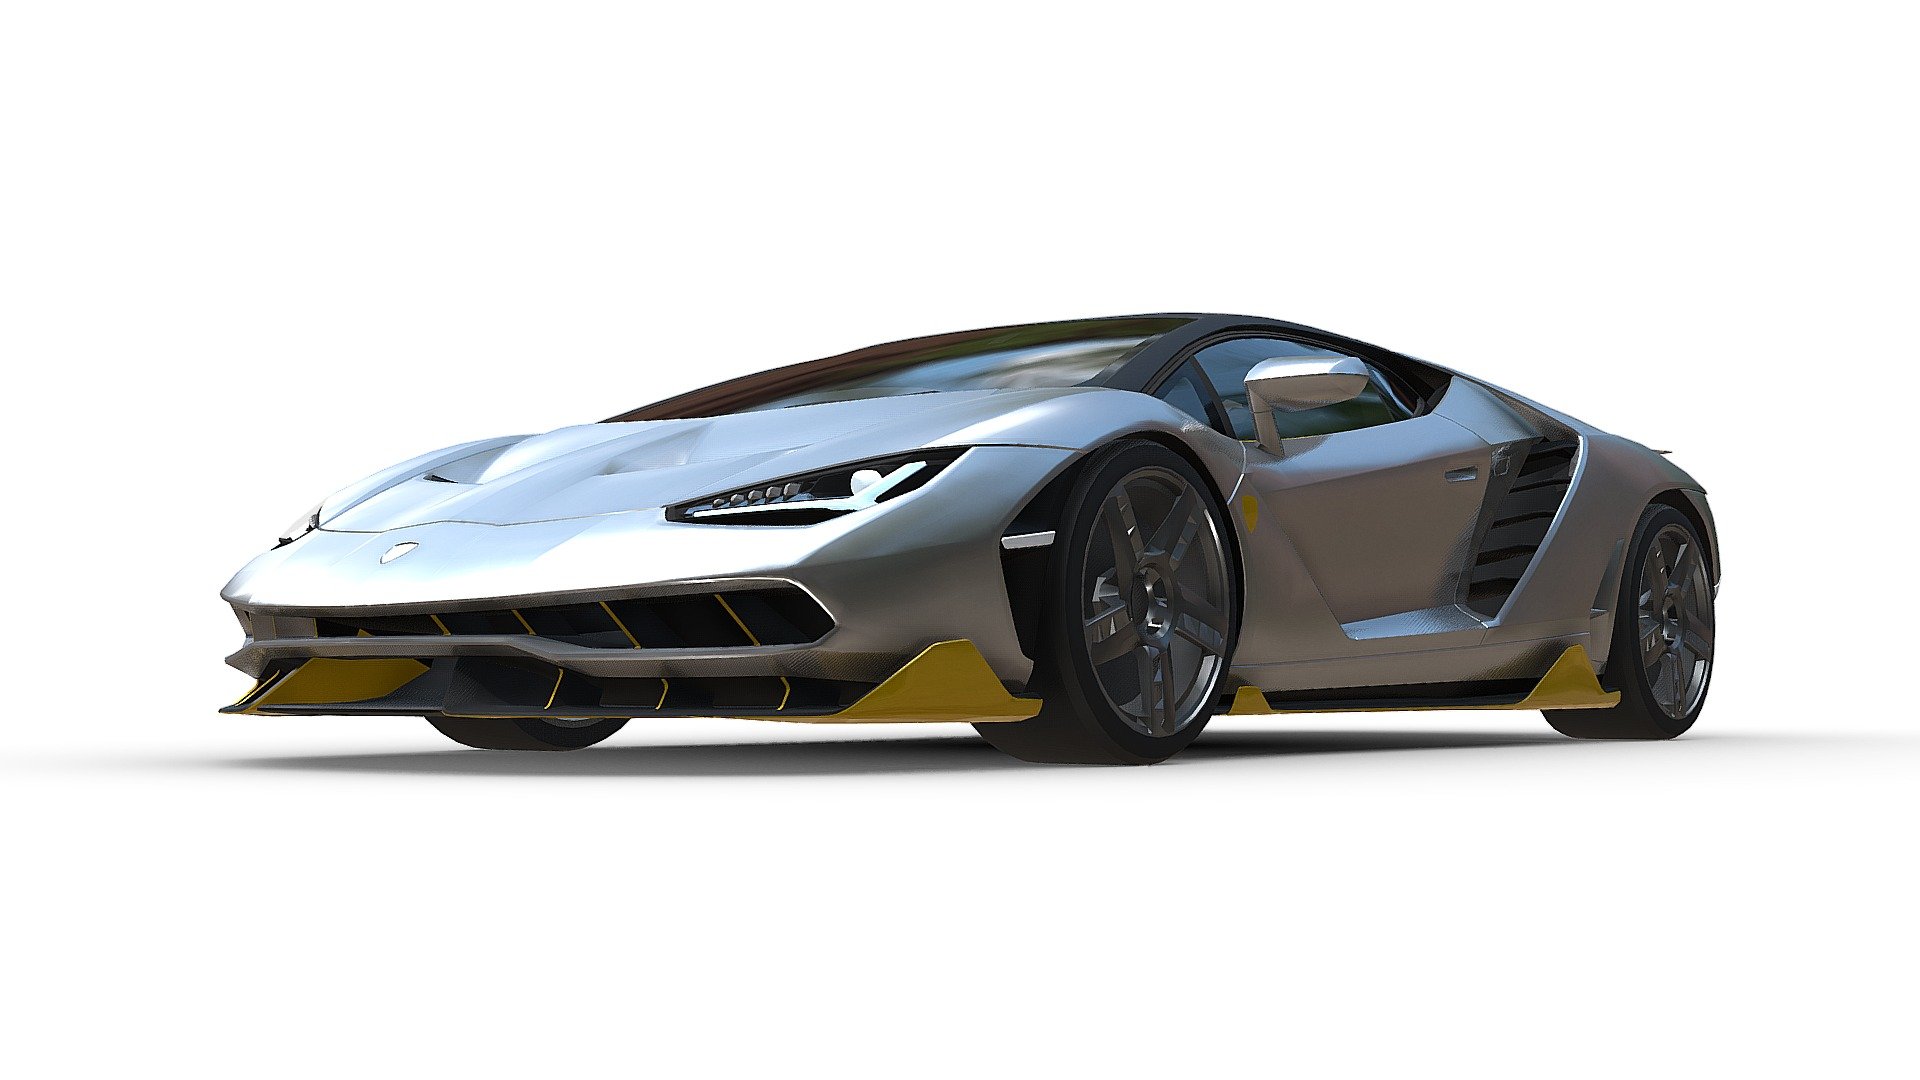 Introducing the Lamborghini Centenario 3D model! Experience the pinnacle of automotive excellence with this meticulously crafted representation. Explore its iconic design, luxurious interior, and breathtaking performance. Immerse yourself in the world of automotive artistry as you admire its aerodynamic lines and striking curves. Get up close and personal with the engine, showcasing raw power and precision engineering. Perfect for car enthusiasts and collectors, this model embodies the legacy of Lamborghini. Don't miss out on this exquisite 3D masterpiece capturing the spirit of the Centenario. Prepare for an unforgettable journey into automotive luxury 3d model